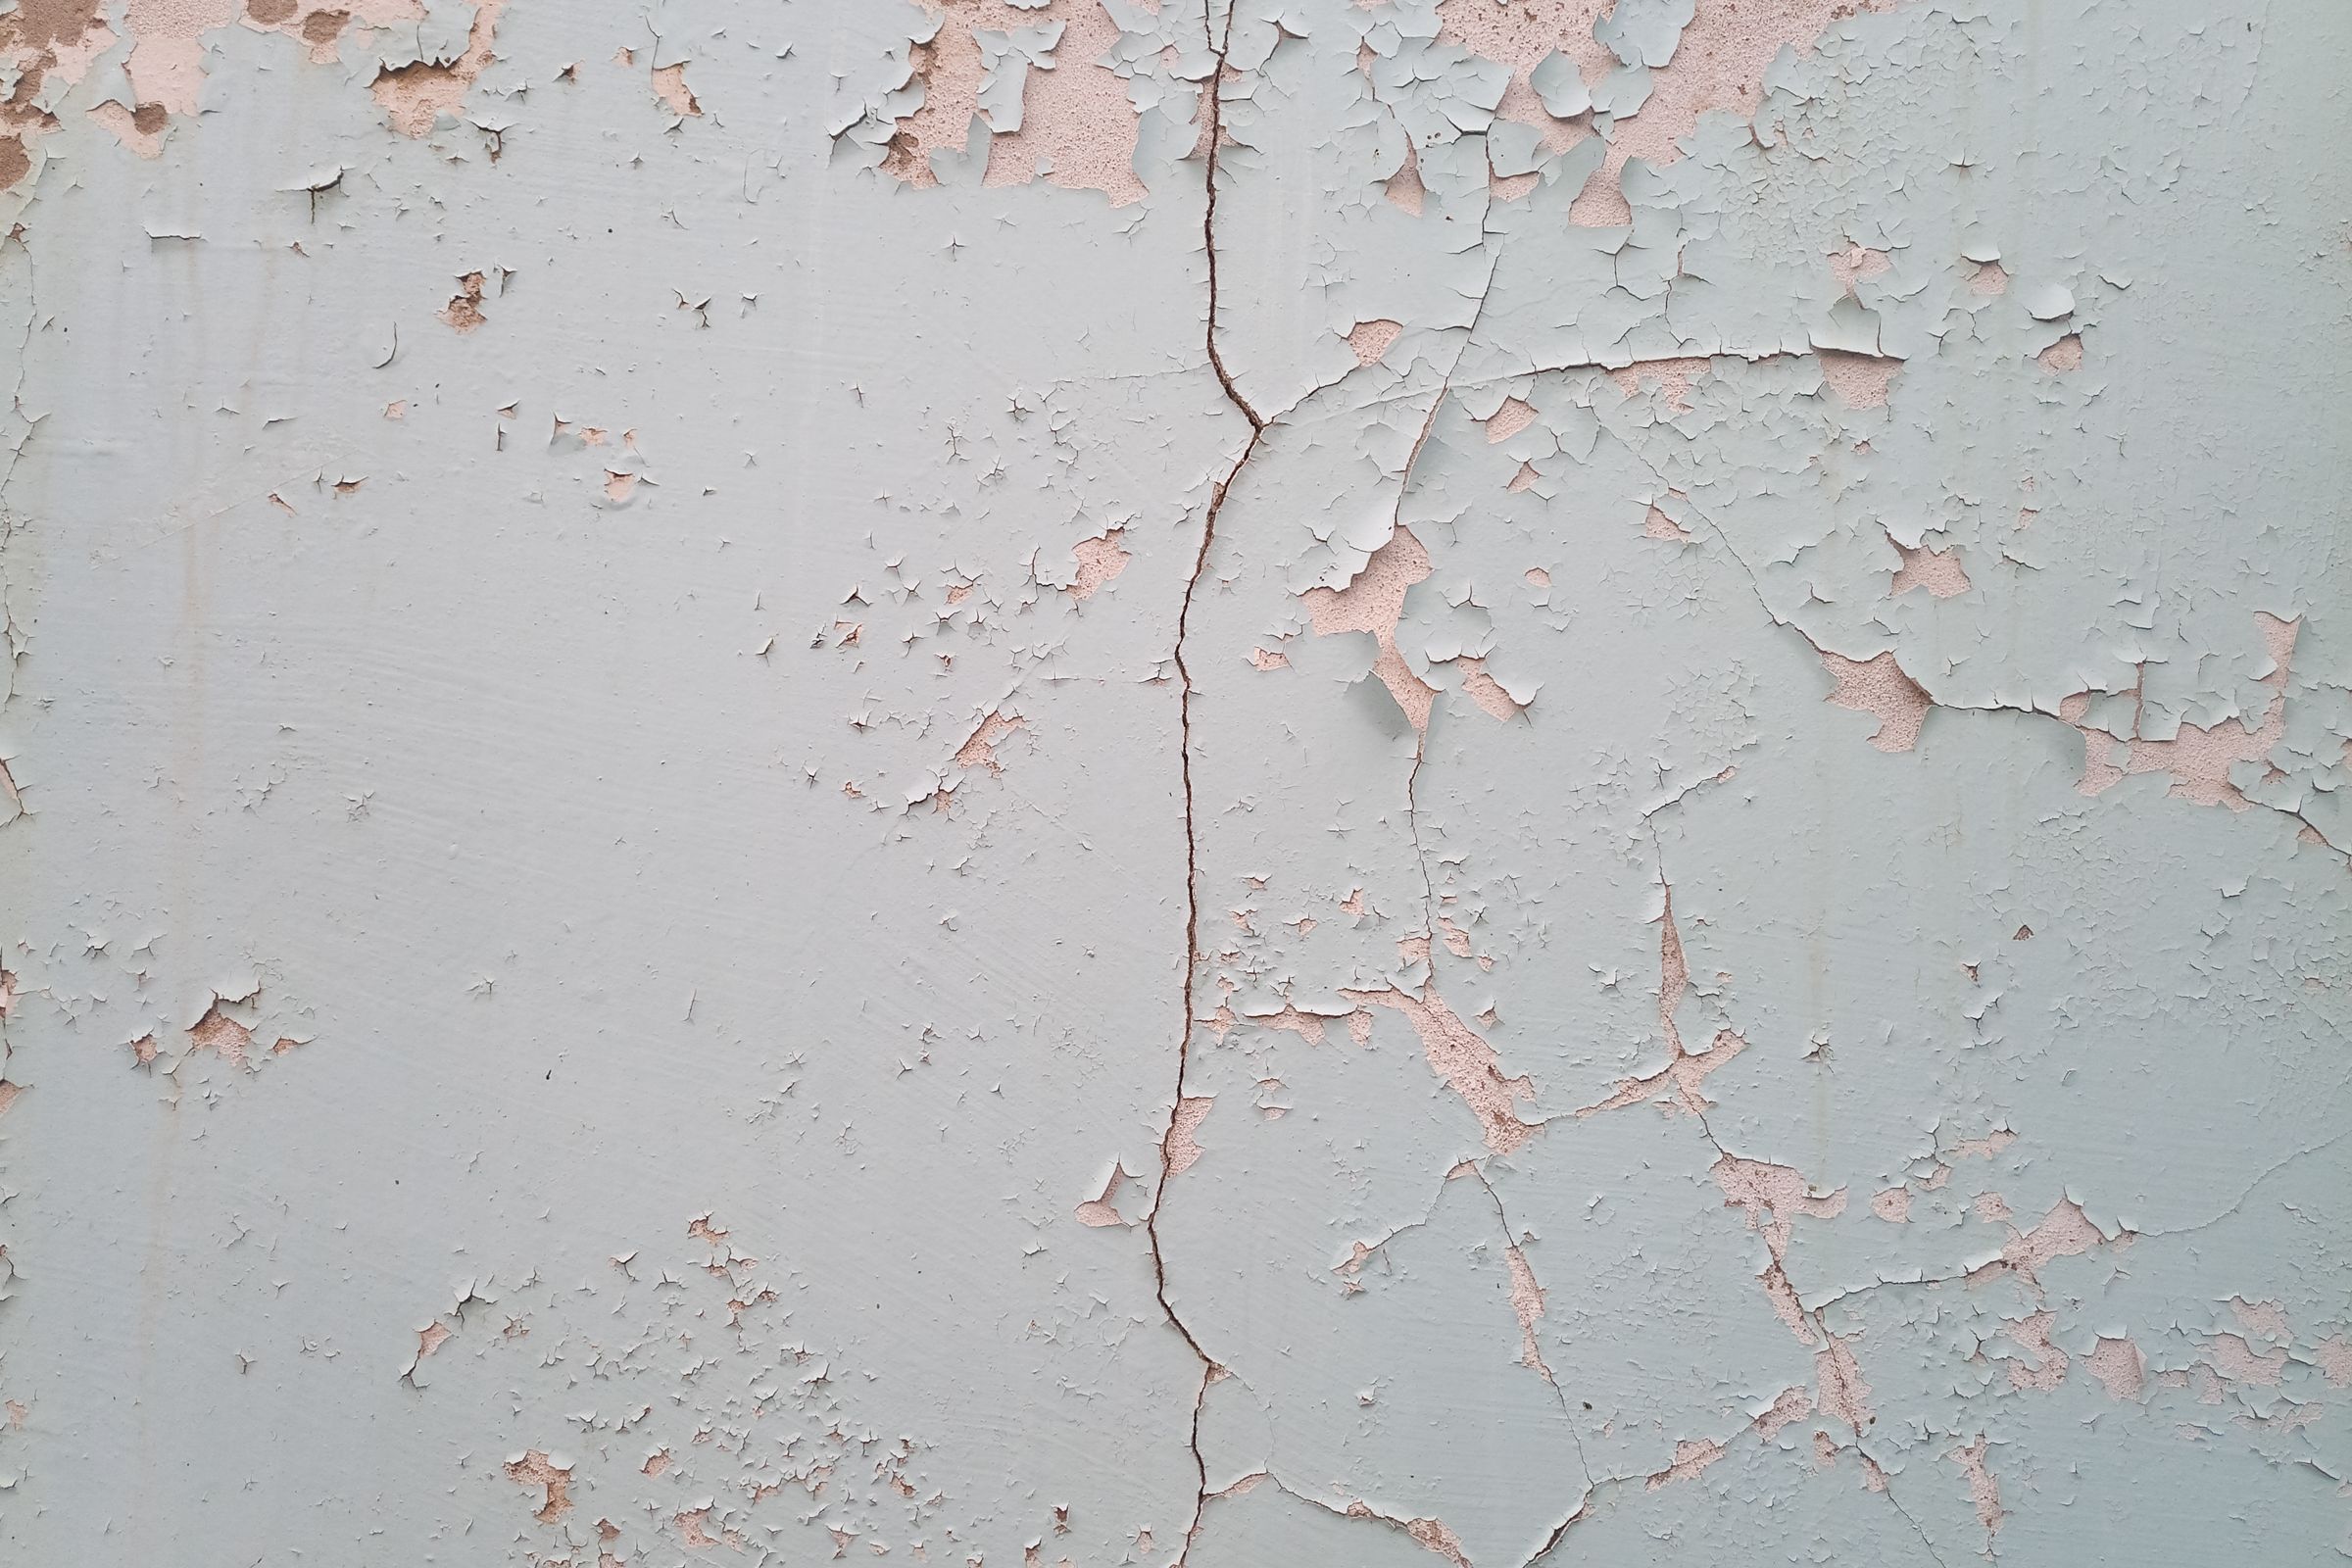 Why Does Your Paint Bubble, Crack and Peel Off the Walls? (How to Fix & Prevent It)